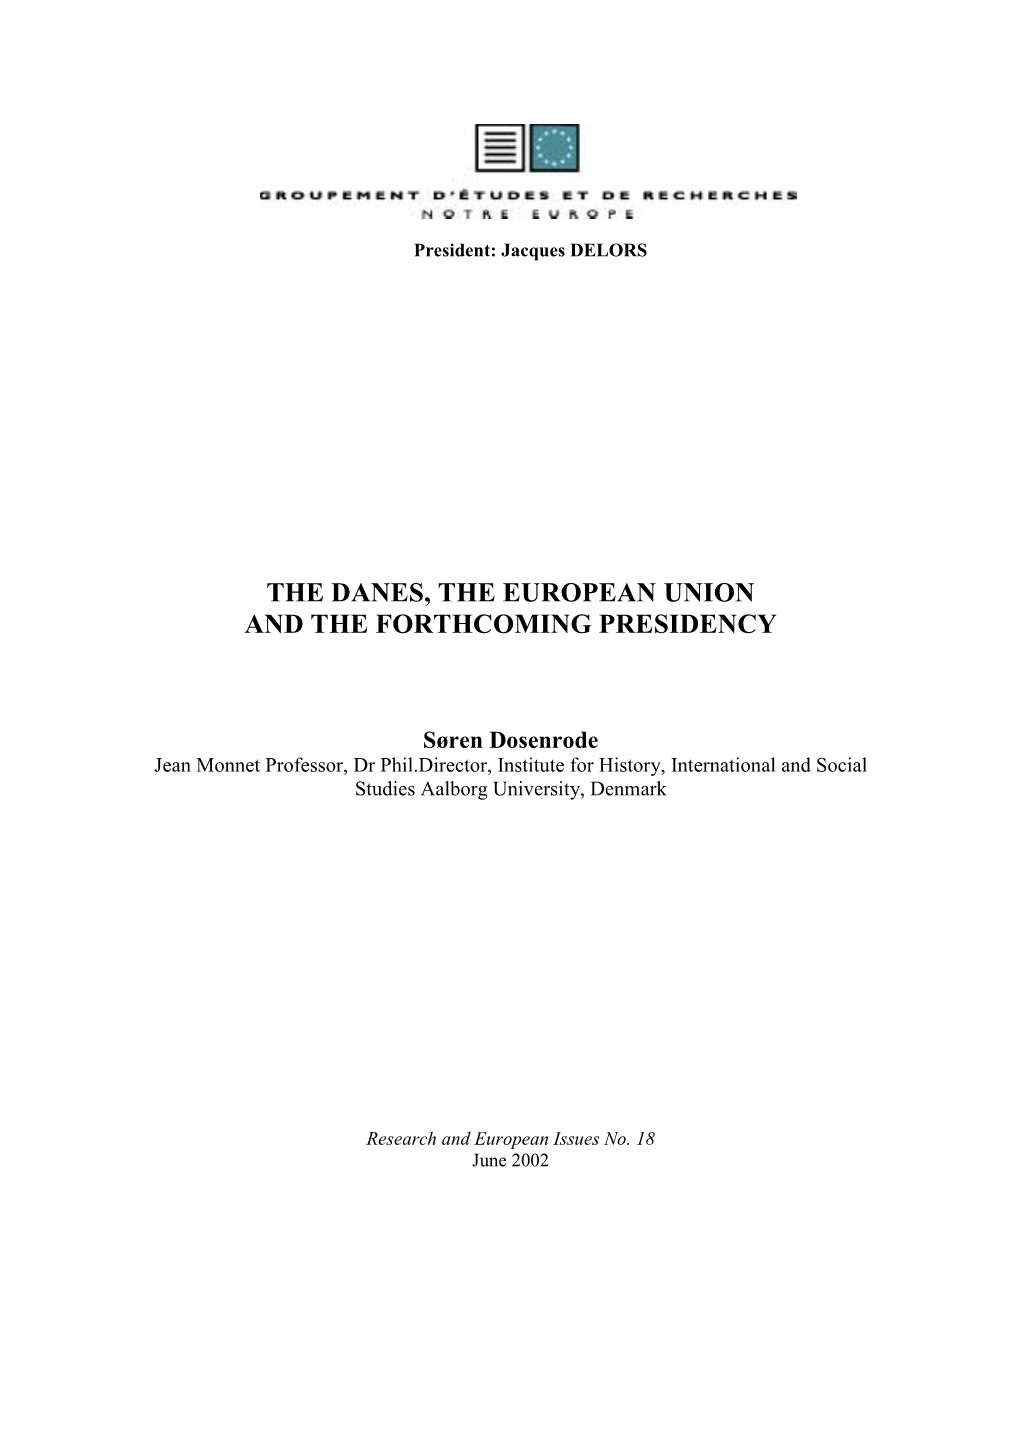 The Danes, the European Union and the Forthcoming Presidency